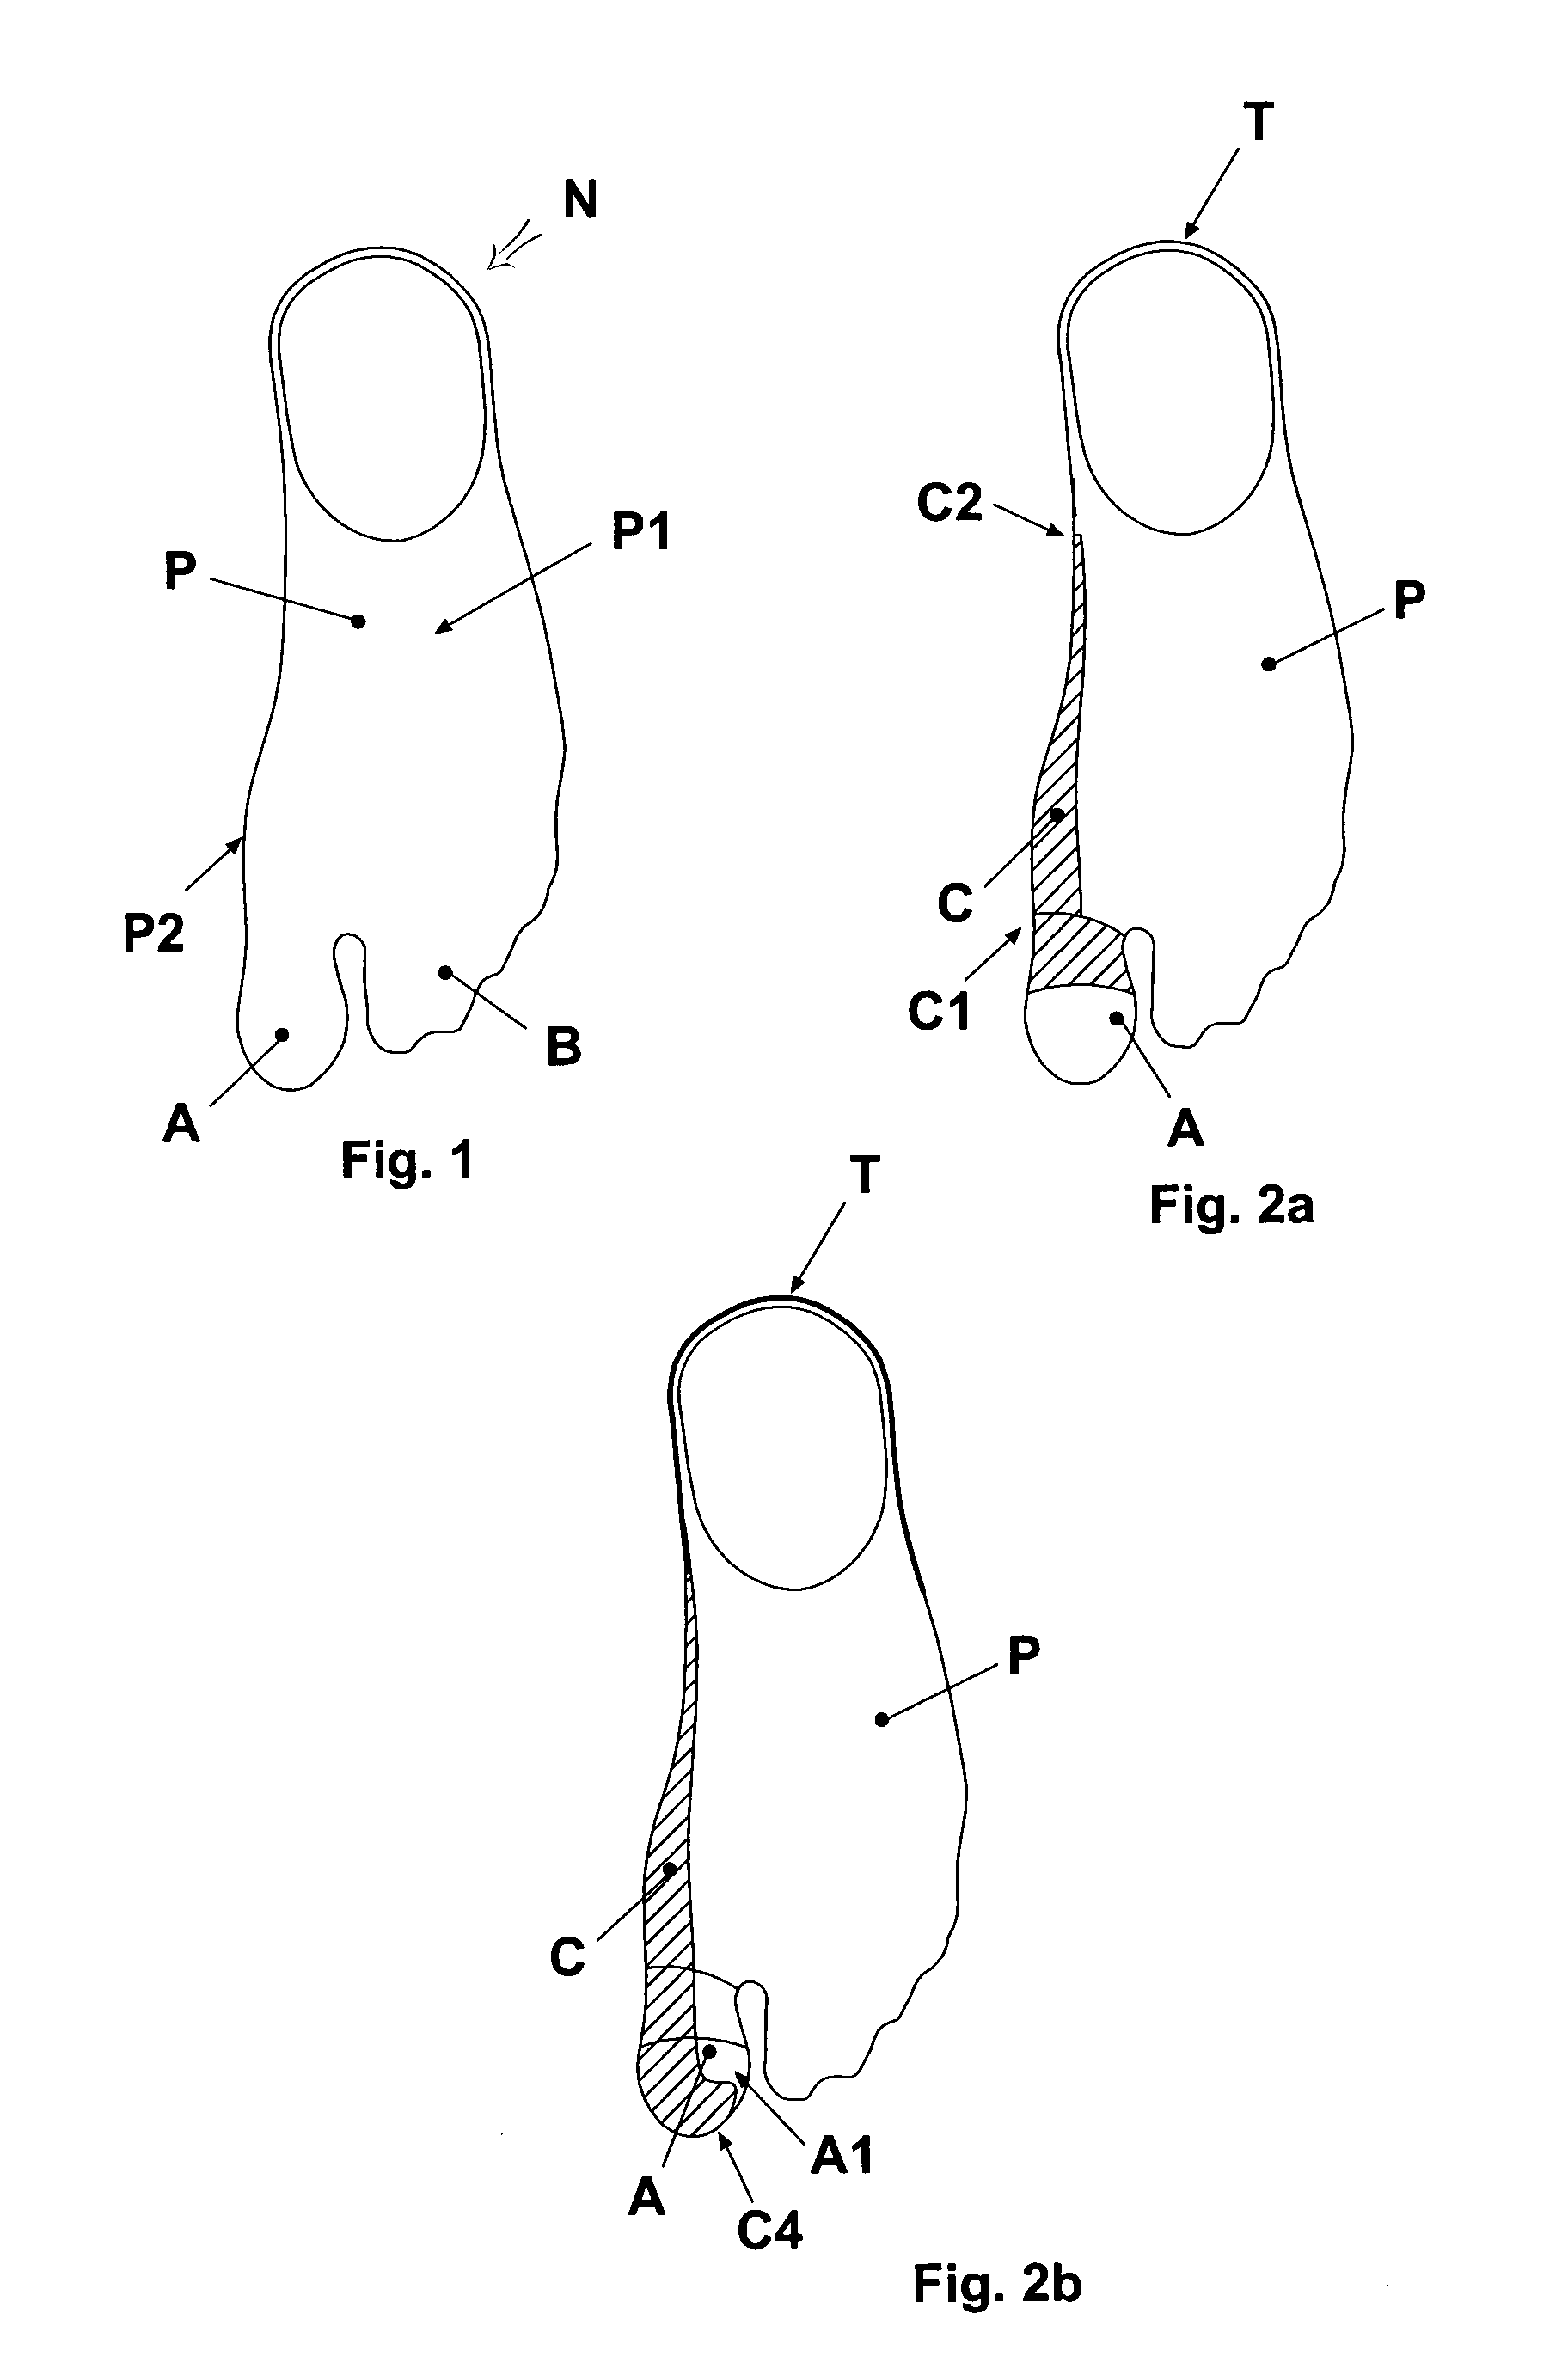 Reinforced stocking or sock for the prevention and/or treatment of hallux valgus